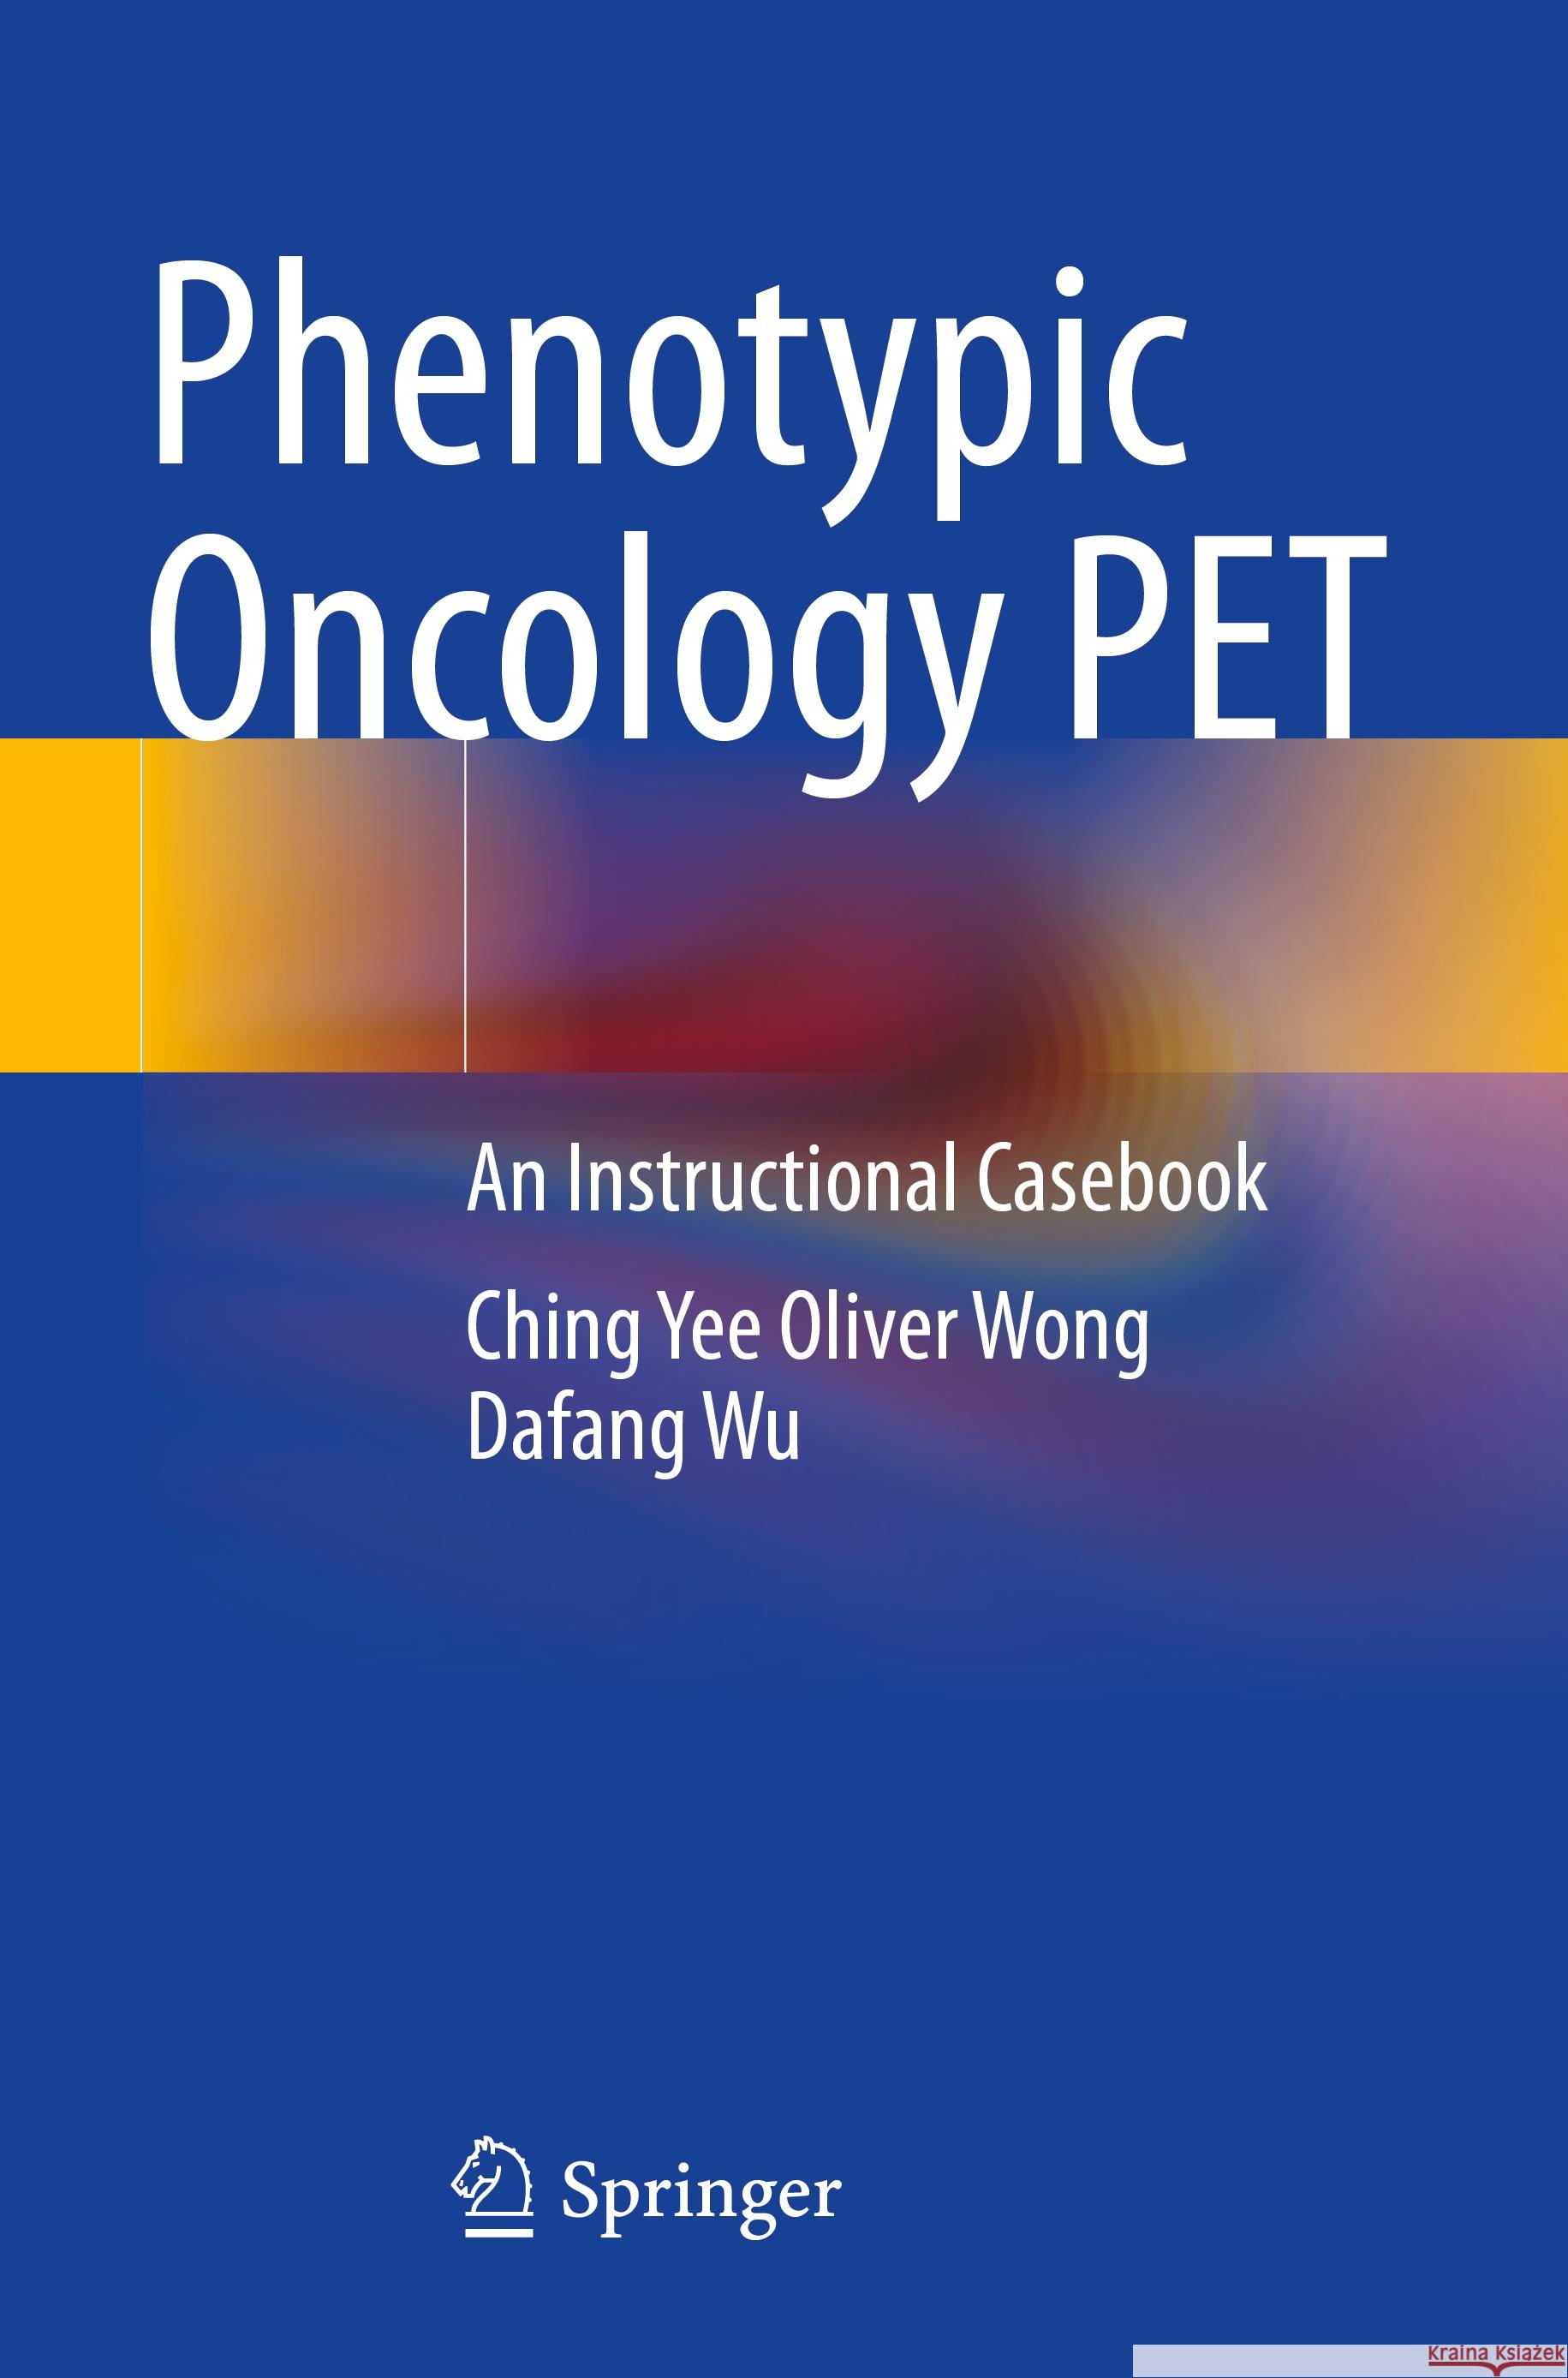 Phenotypic Oncology PET  Ching Yee Oliver Wong, Dafang Wu 9783031097393